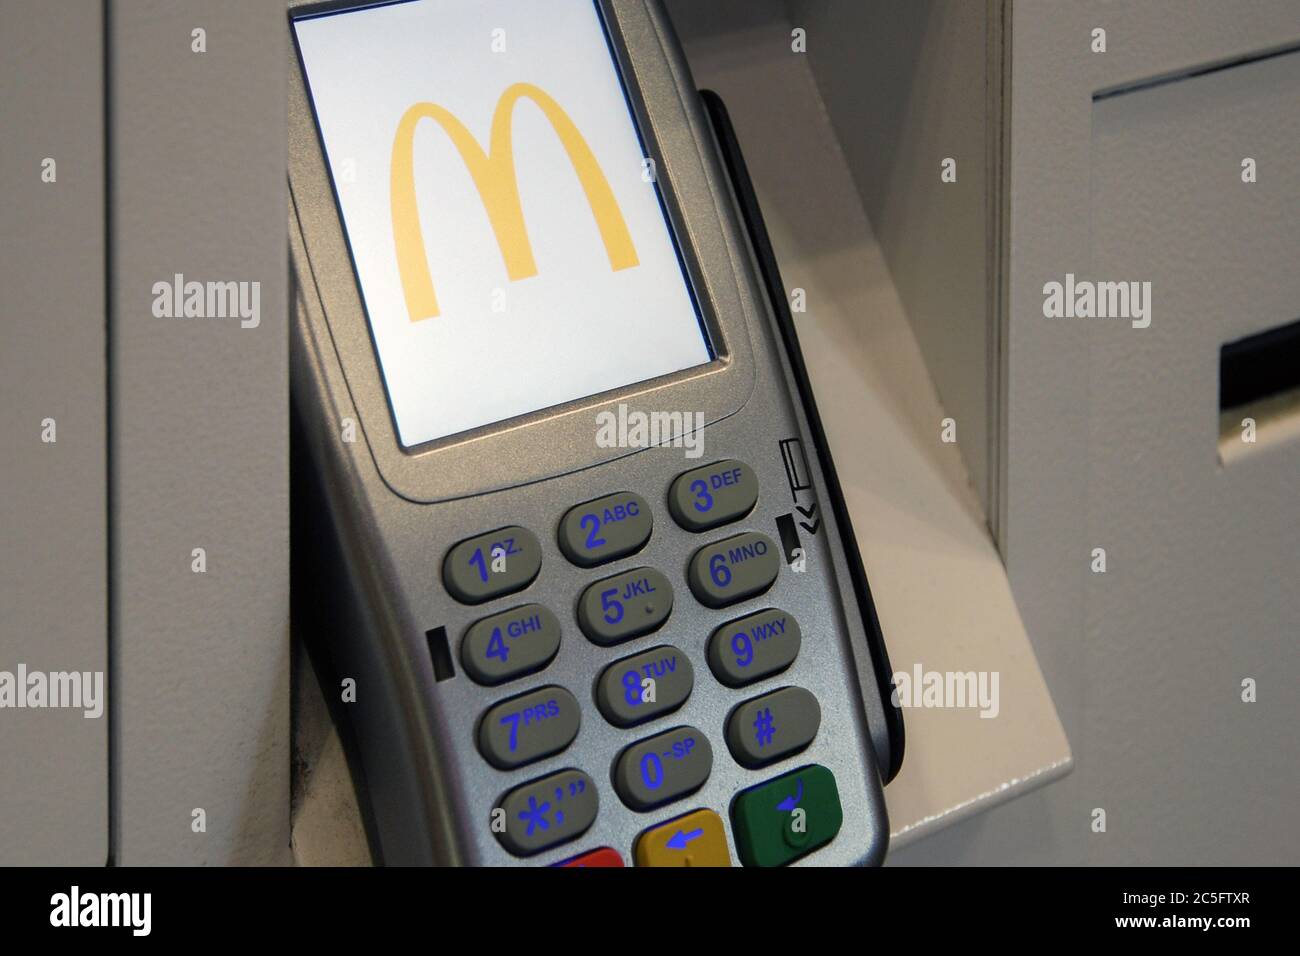 Moscow 02/09/2019 Verifone payment terminal at McDonald’s fastfood restaurant Stock Photo